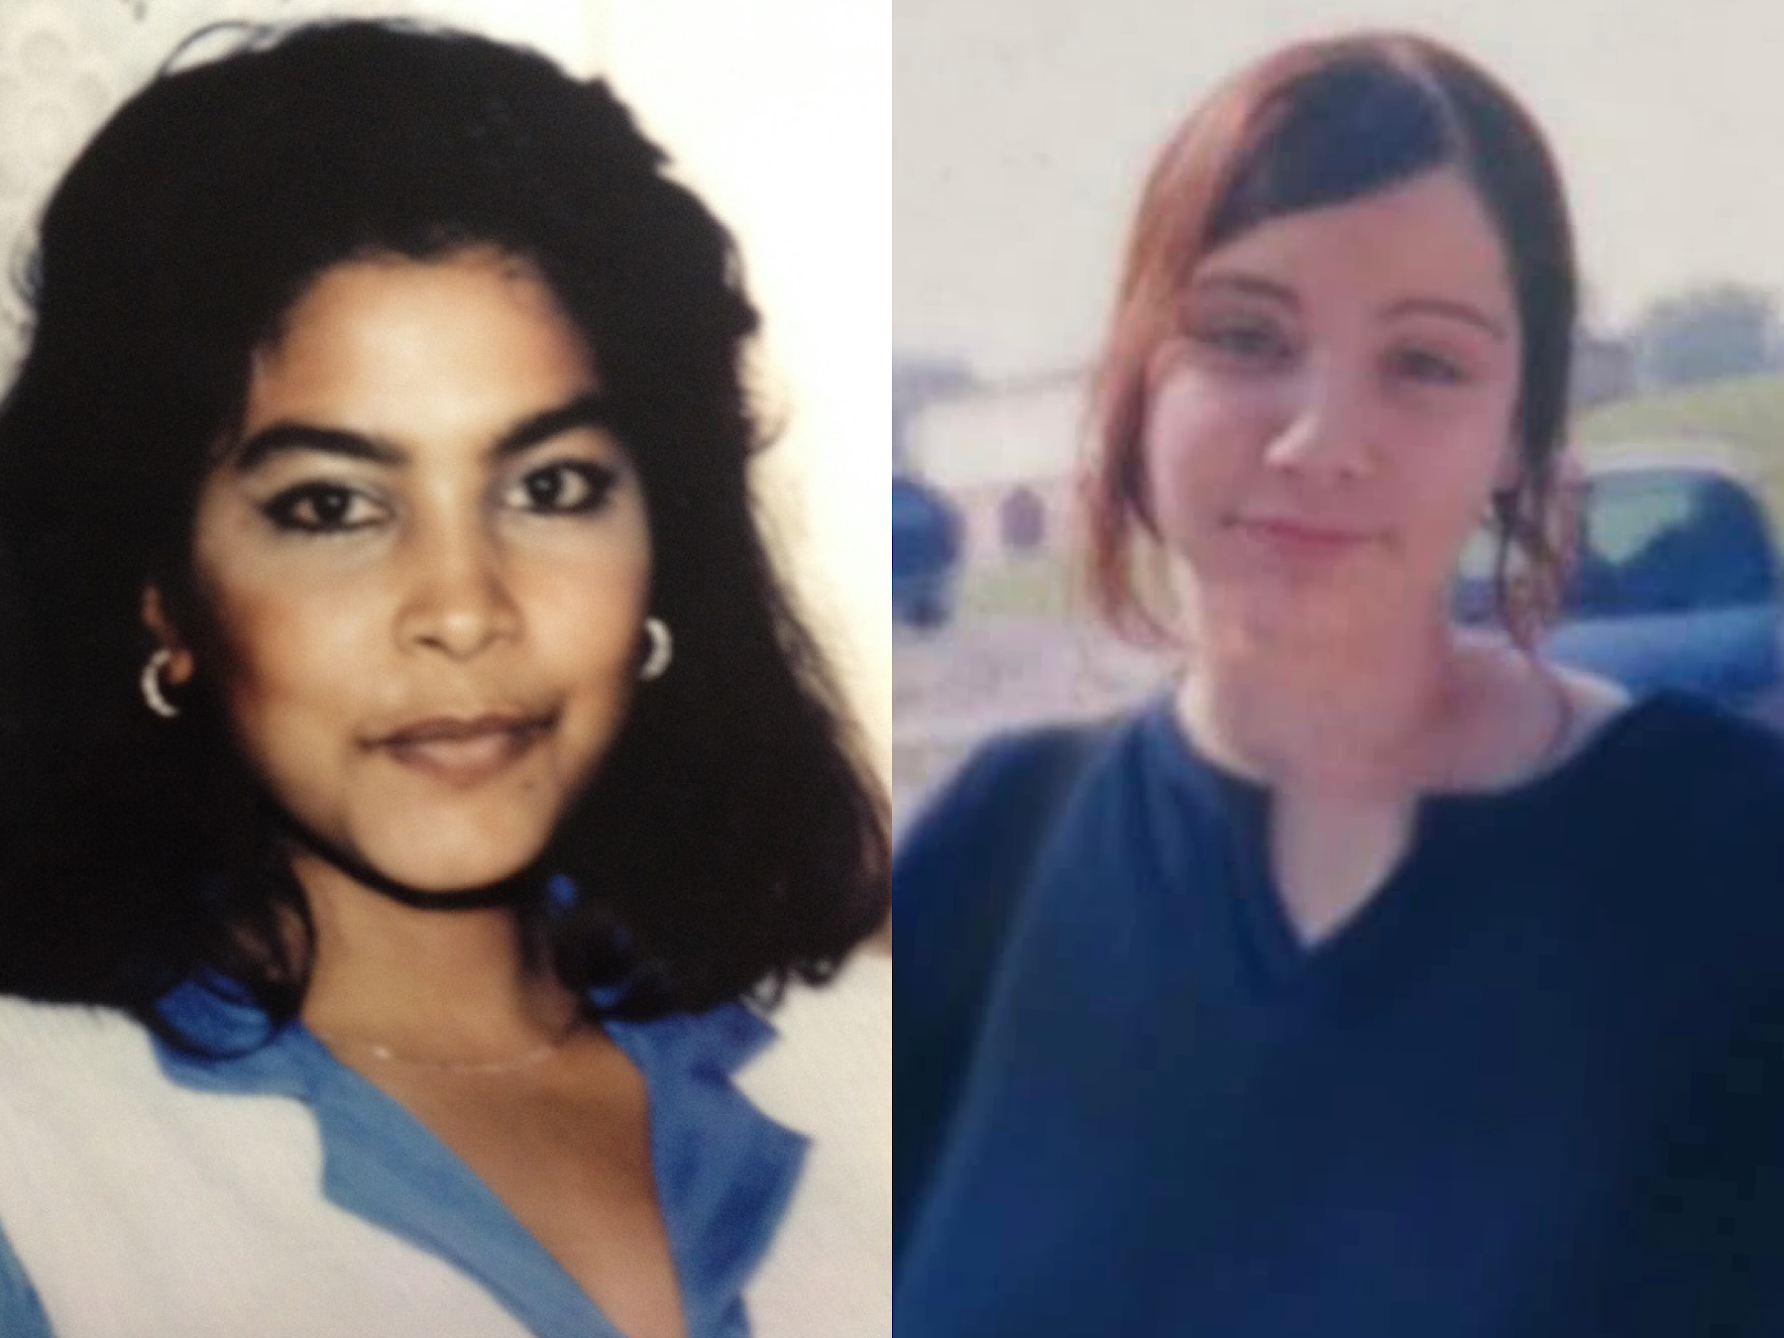 Sandra Costilla (left) and Jessica Taylor (right) are the first alleged victims of Rex Heuermann who were murdered before 2007